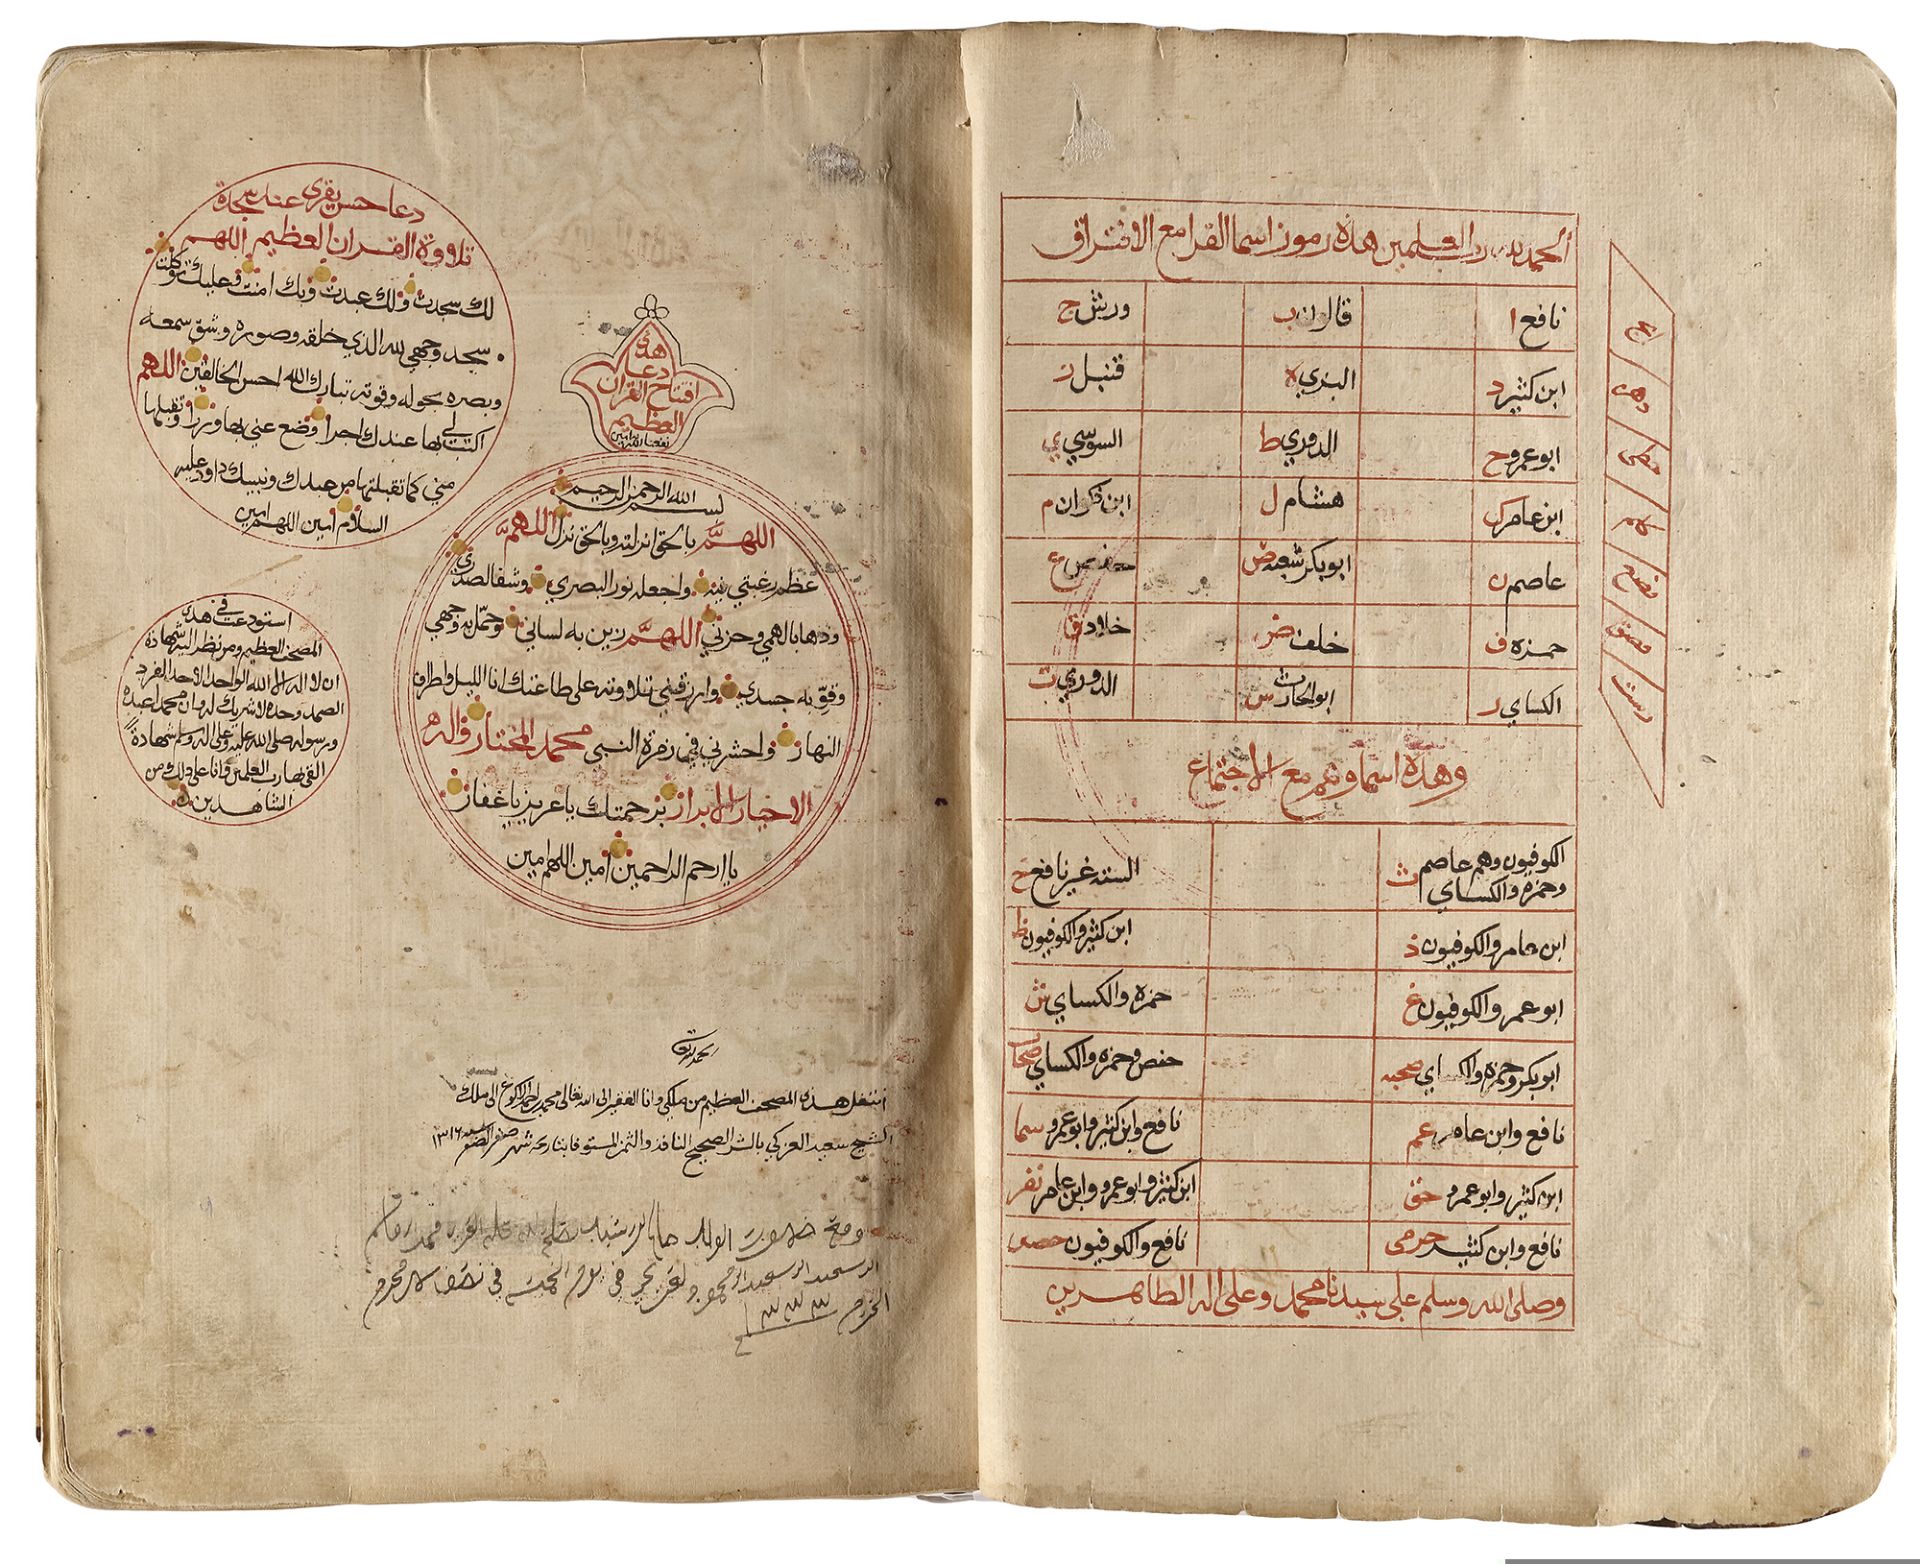 AN ILLUMINATED QURAN, YEMEN, BY AHMED QASEM IBN ISMAIL IN 1035 AH/1626 AD - Image 10 of 18